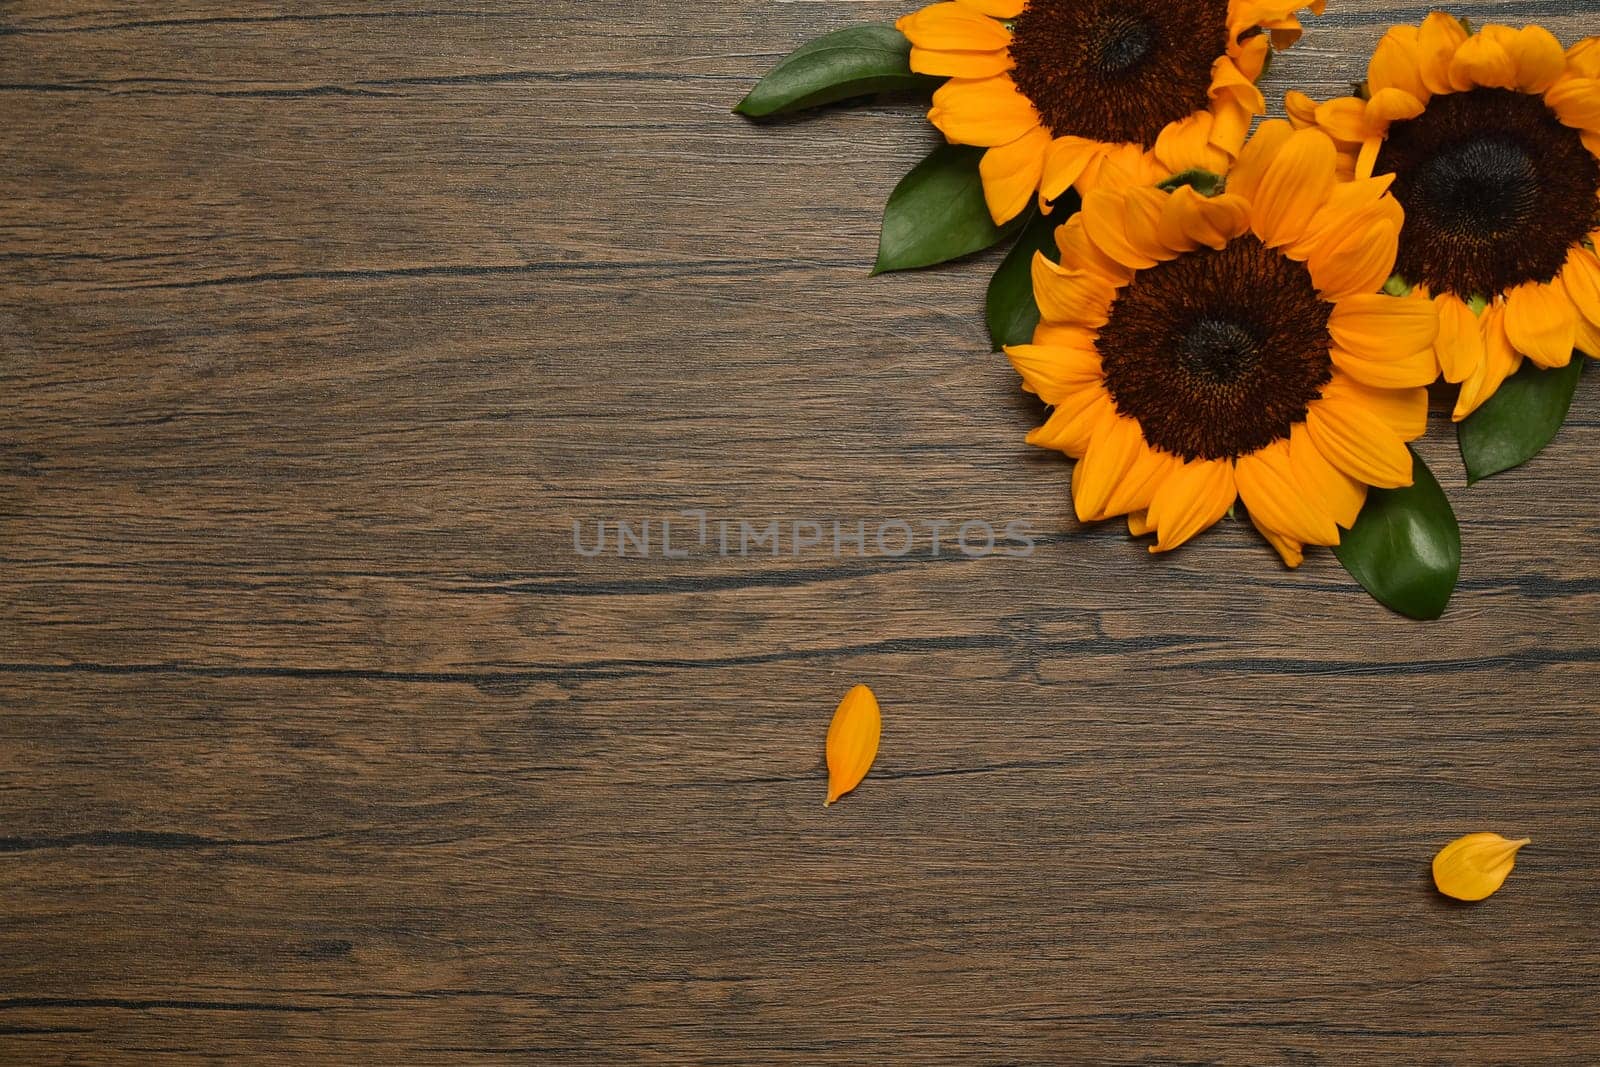 Sunflowers on rustic wooden background. Top view with copy space, floral background.